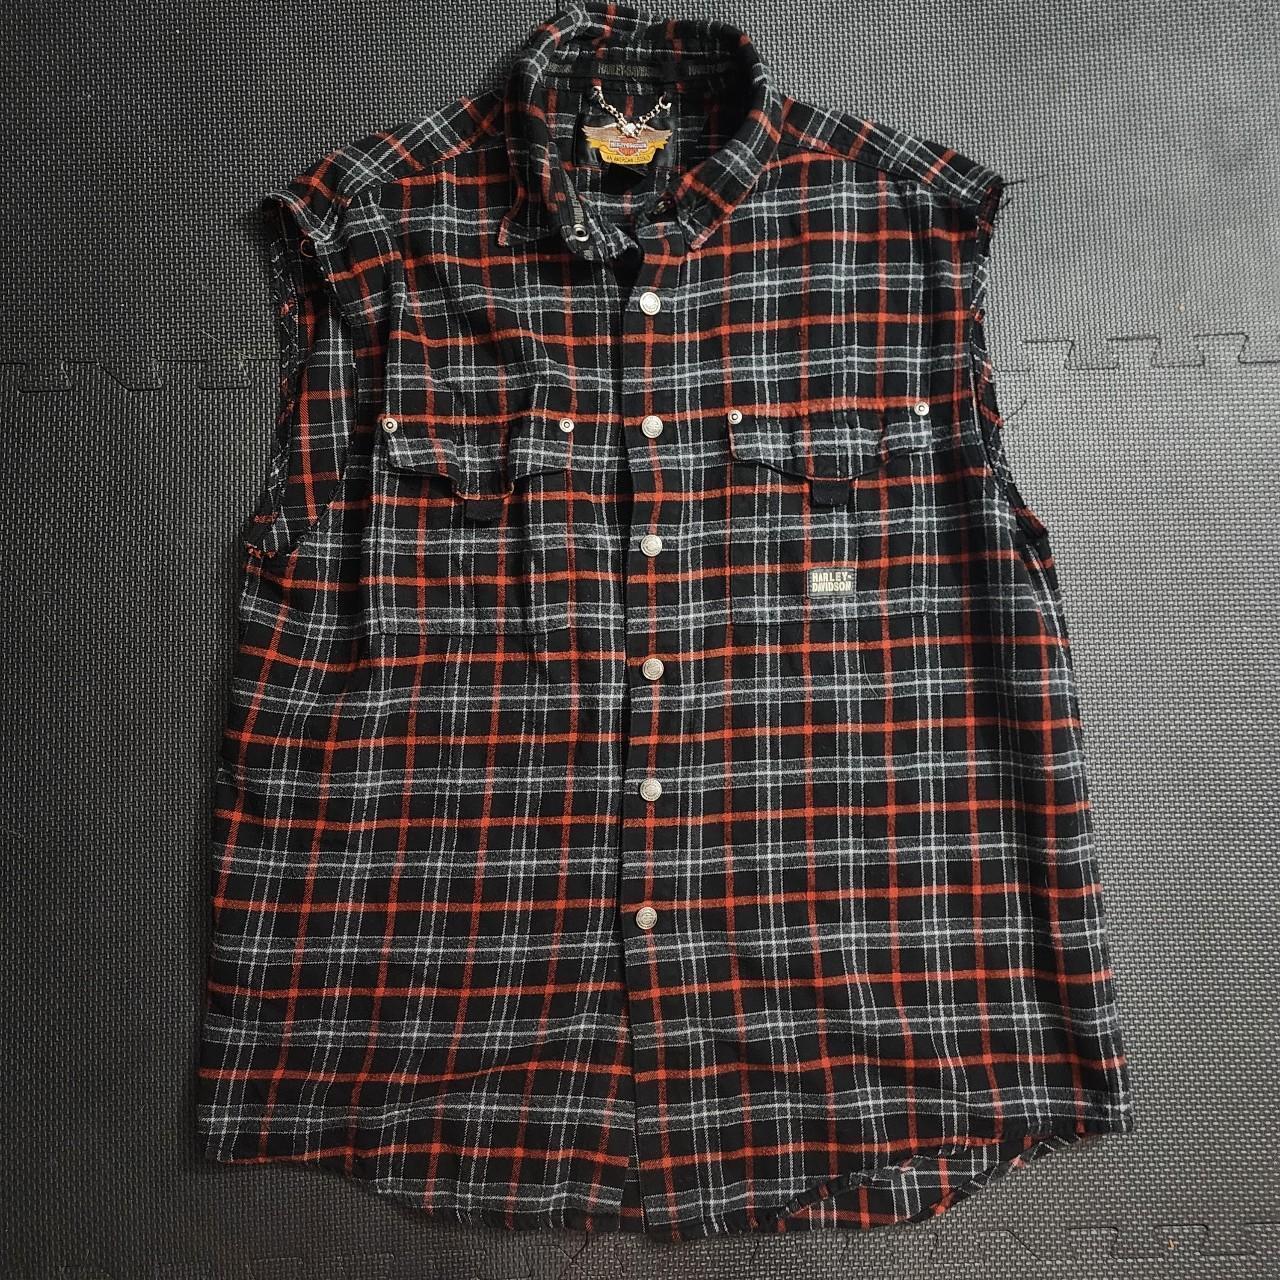 item listed by nothingnormalauthentics